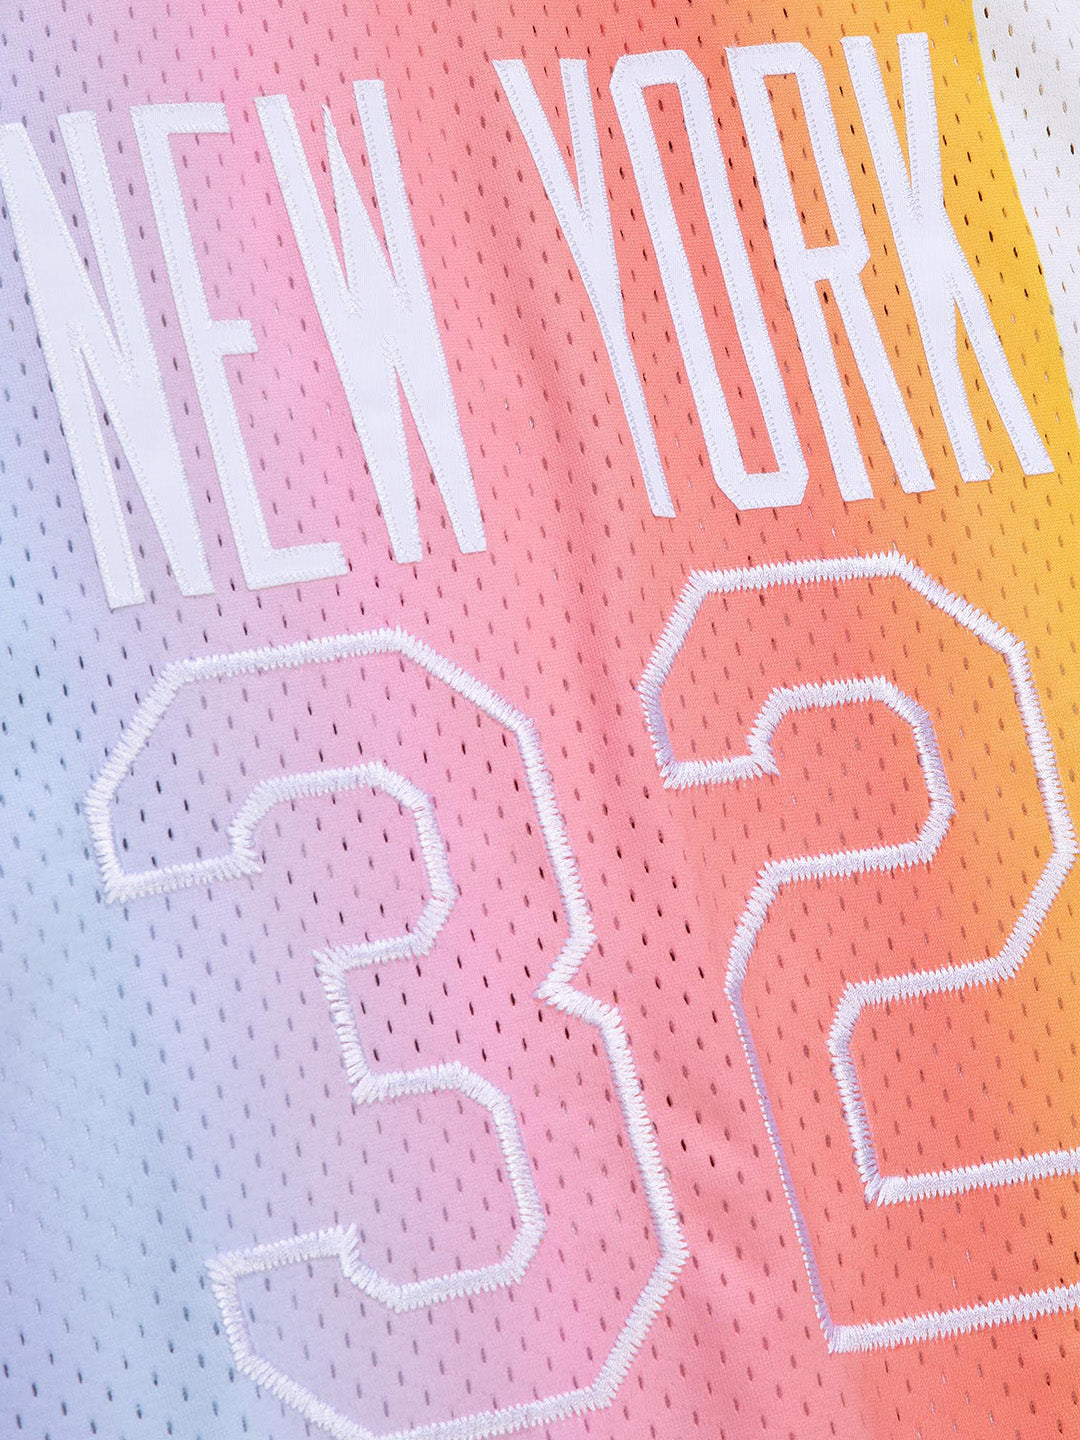 UNINTERRUPTED X Mitchell & Ness Legends Jersey Nets - close up of the number 32 and the "new york"